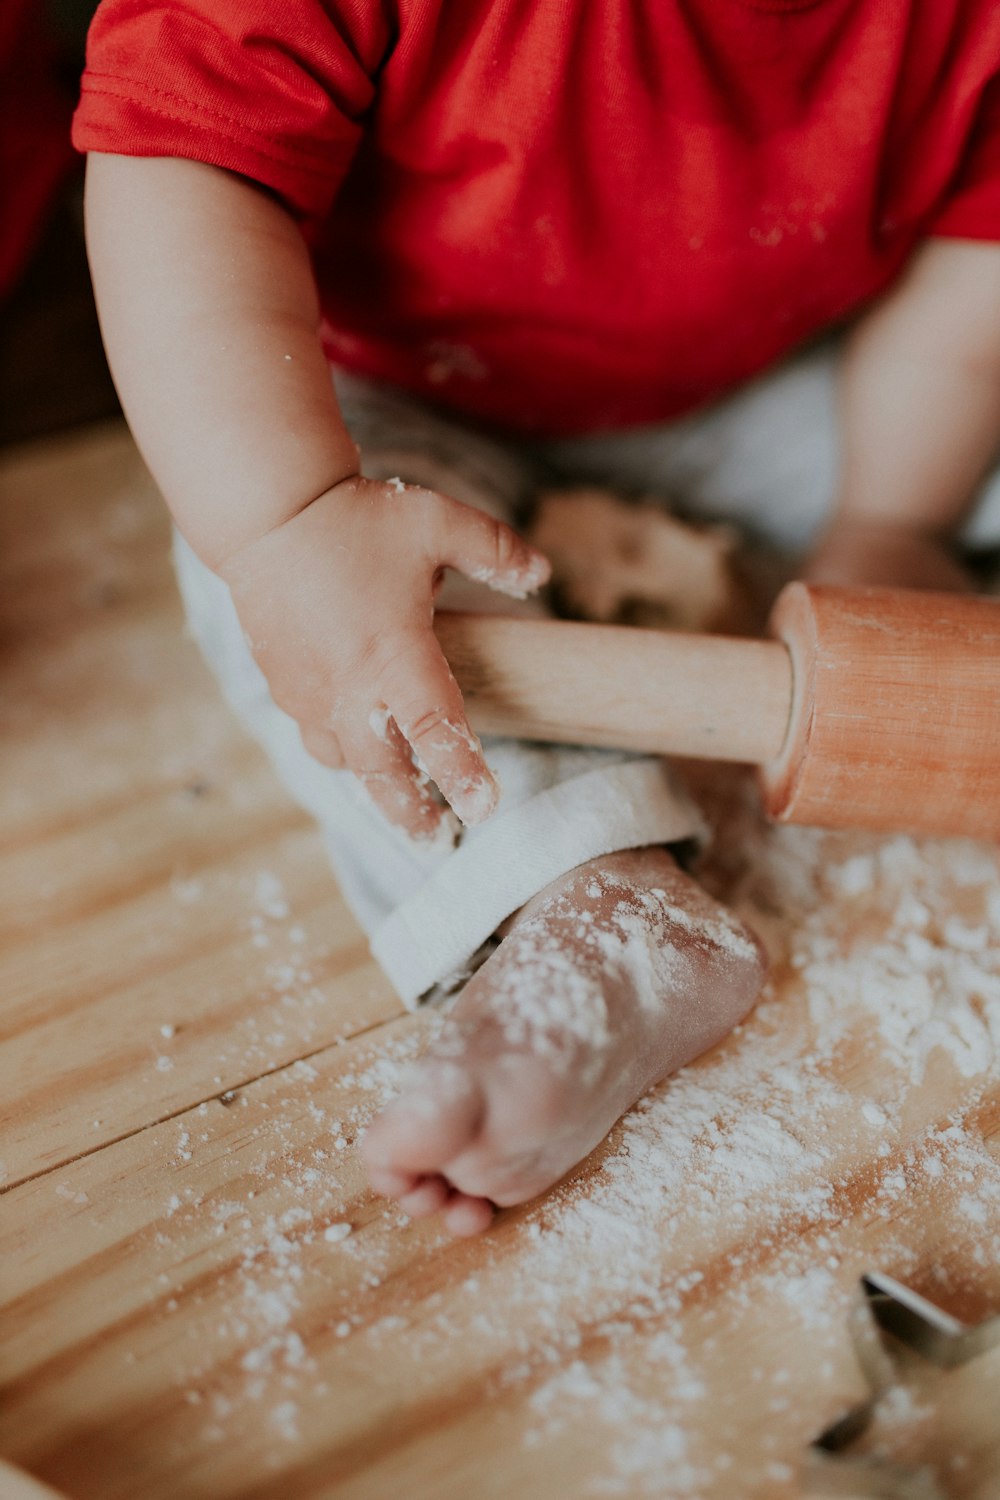 a child rolling dough on top of a wooden table